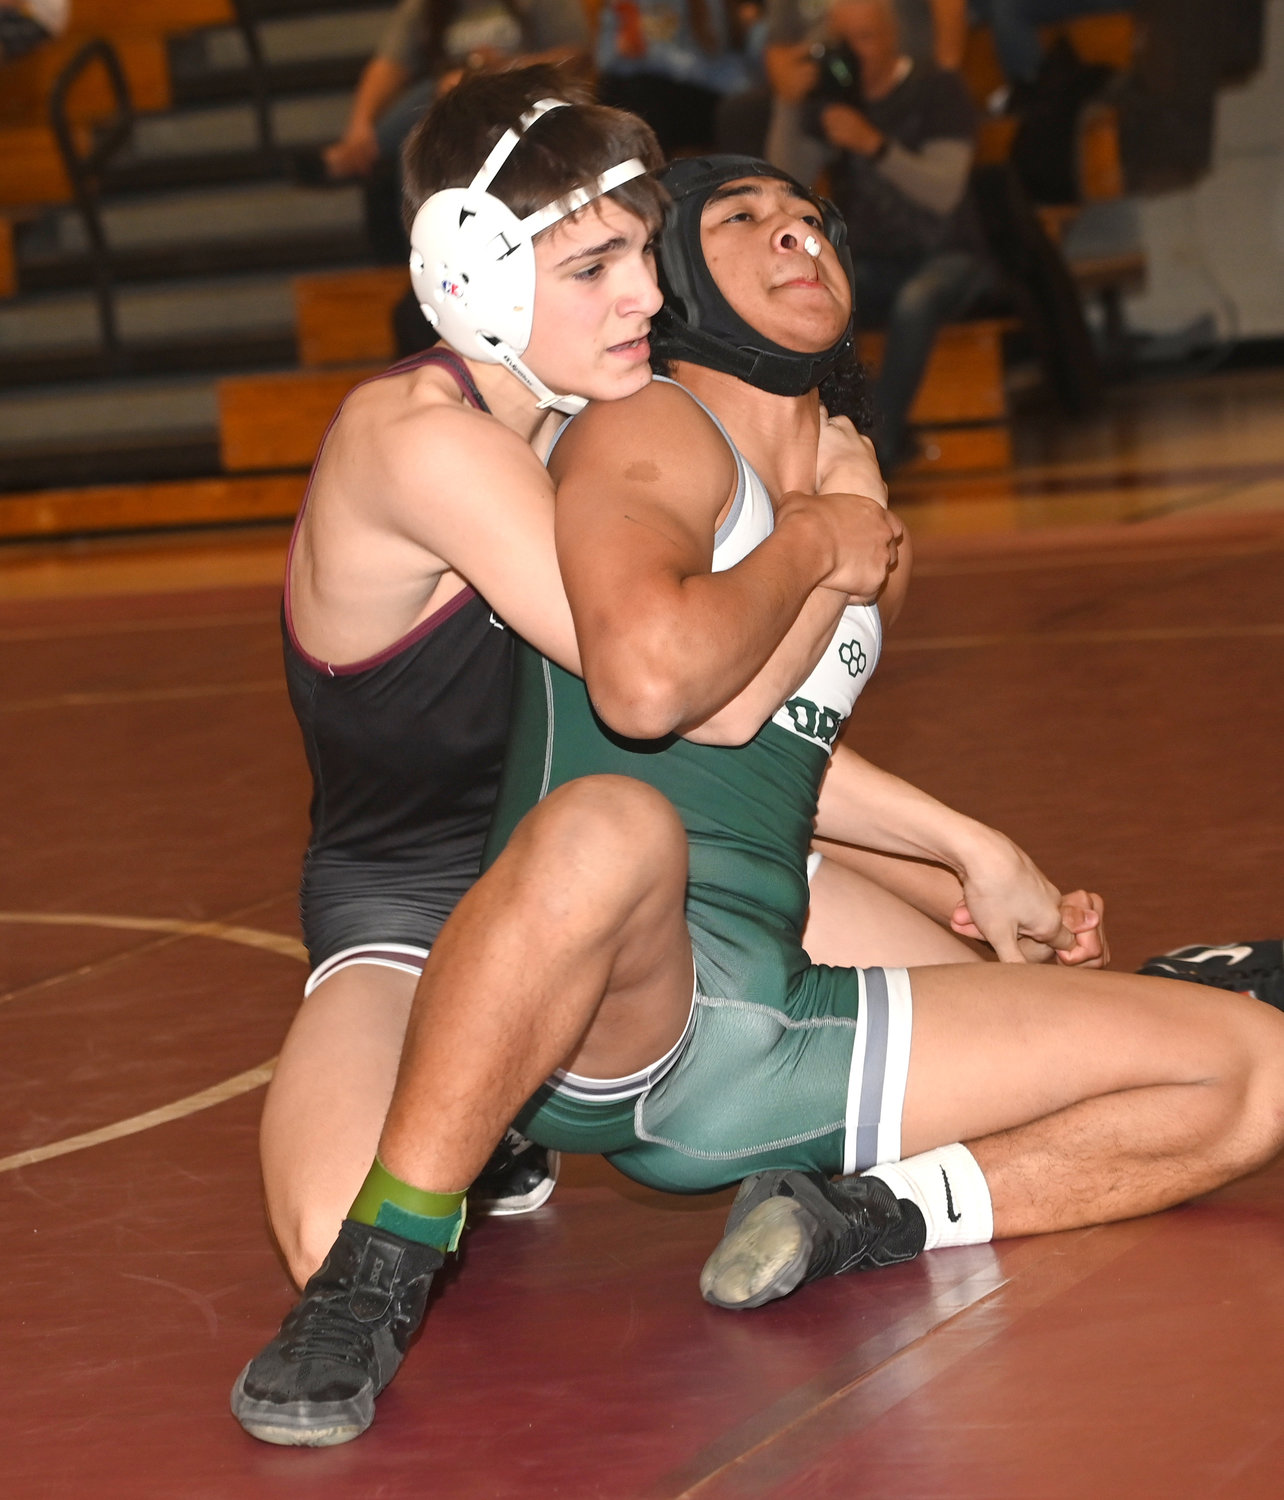 North Shore sophomore Evan Giakoumas, left, opened the season with five straight victories in the 152-pound weight class.